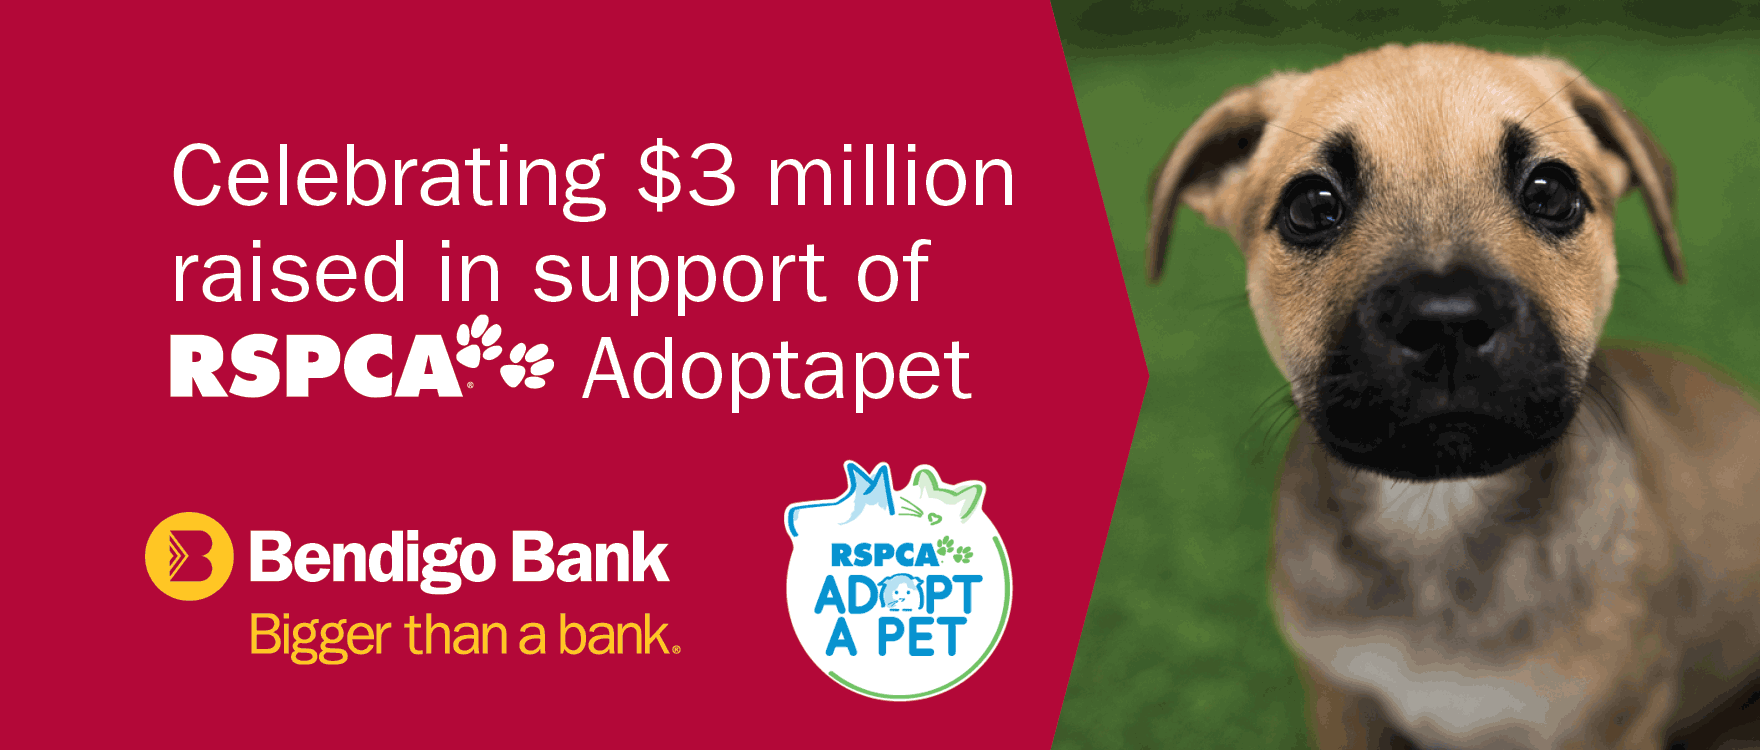 Celebrating $3 million raised in support of RSPCA Adopt-a-pet